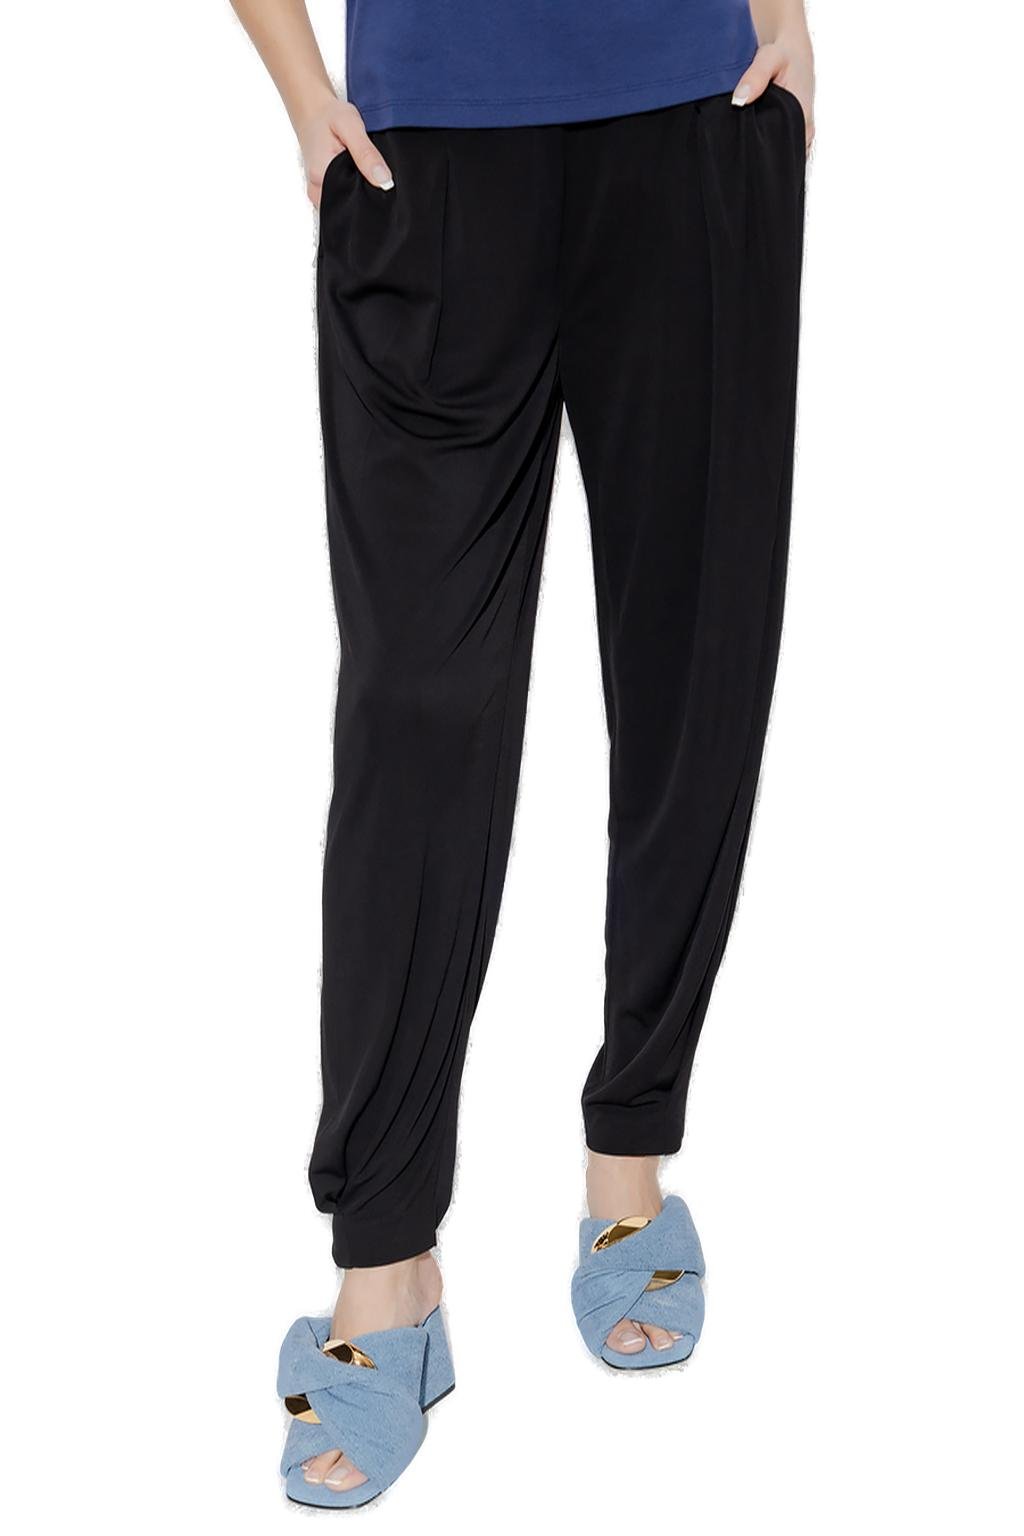 Loewe Relaxed Fitting Drawstring Trousers